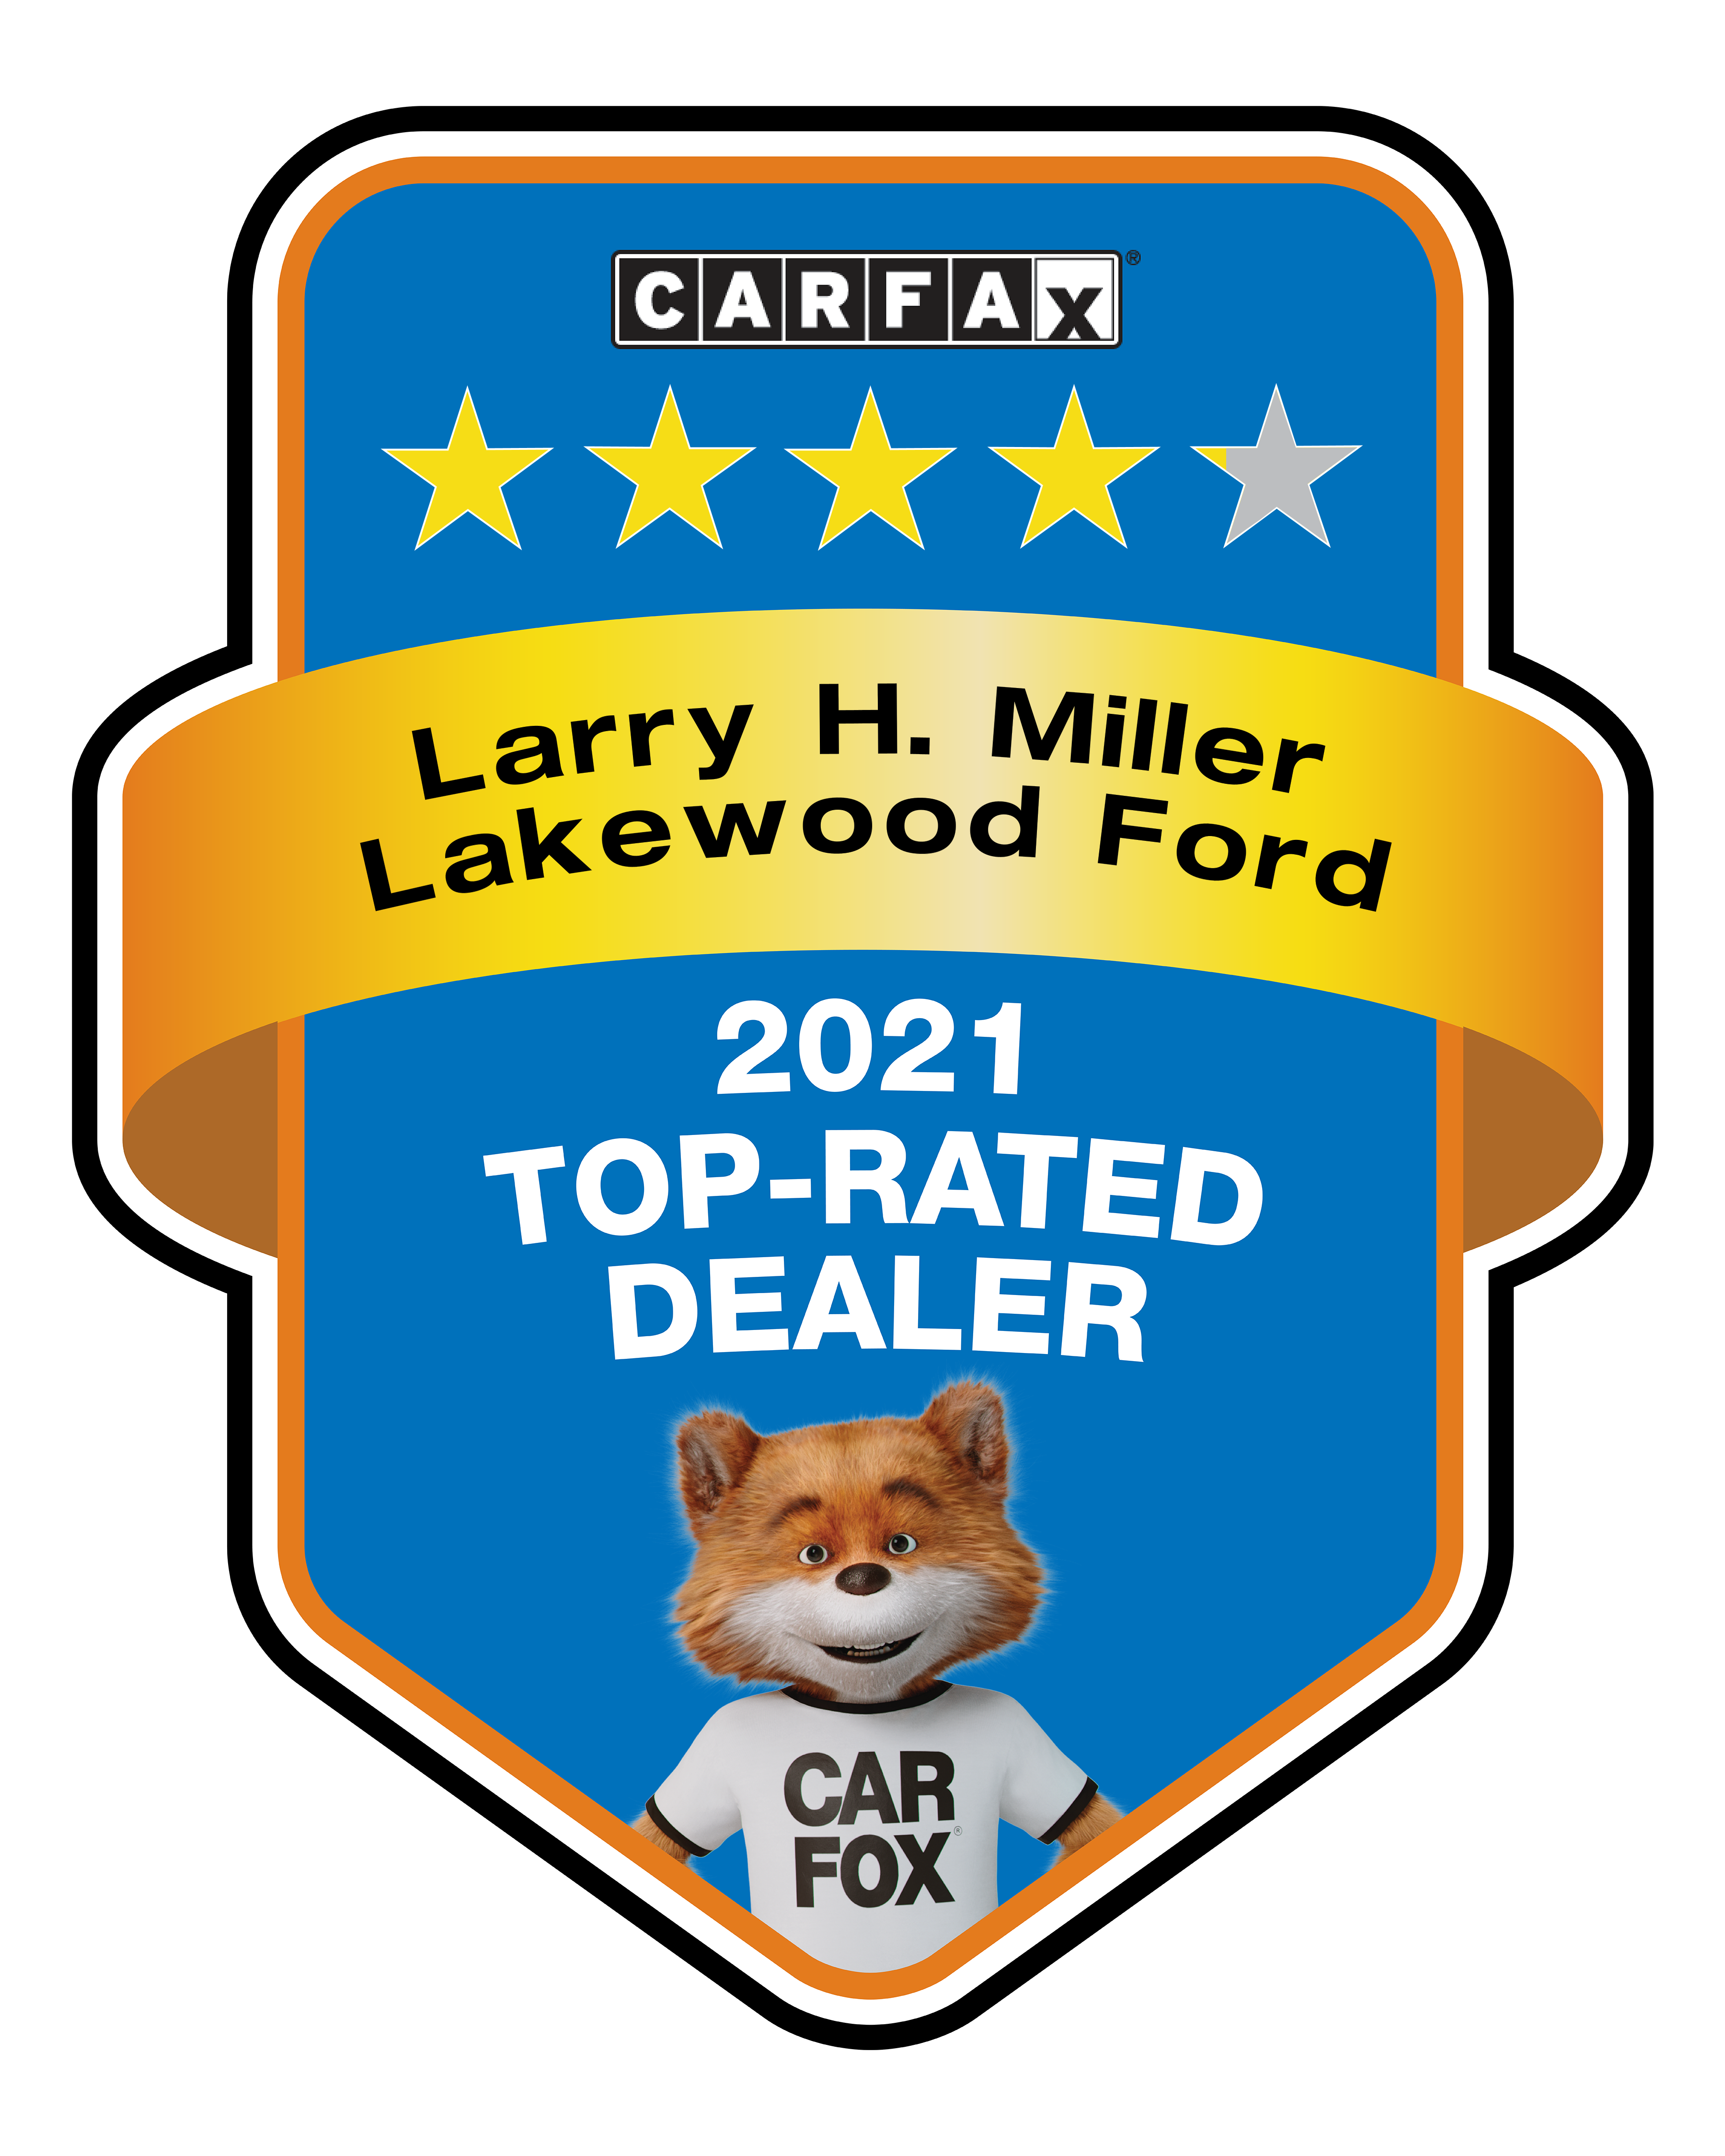 CARFAX TOP RATED